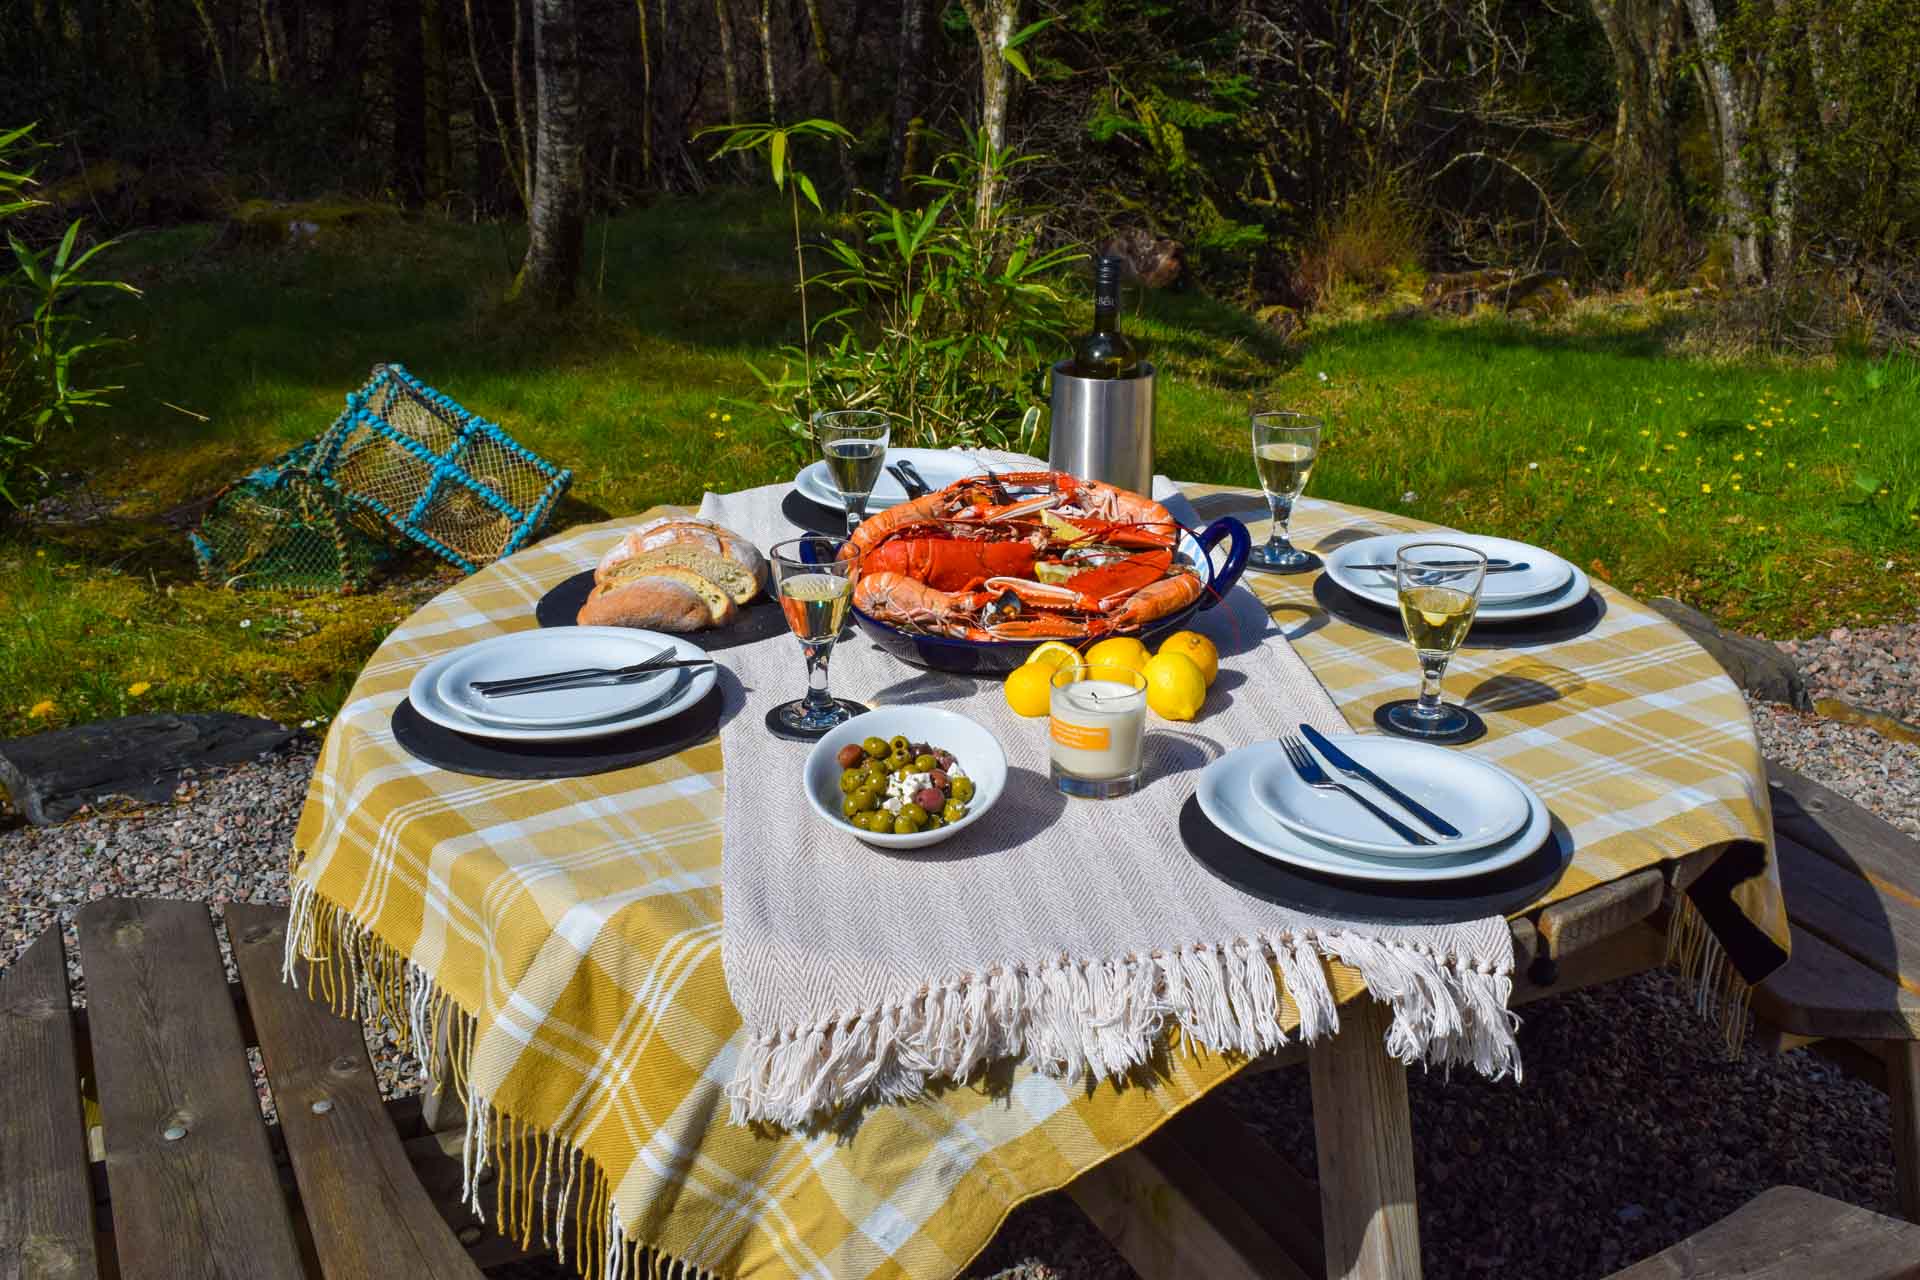 All of our Lodges have outdoor picnic areas for guests to enjoy alfresco dining.